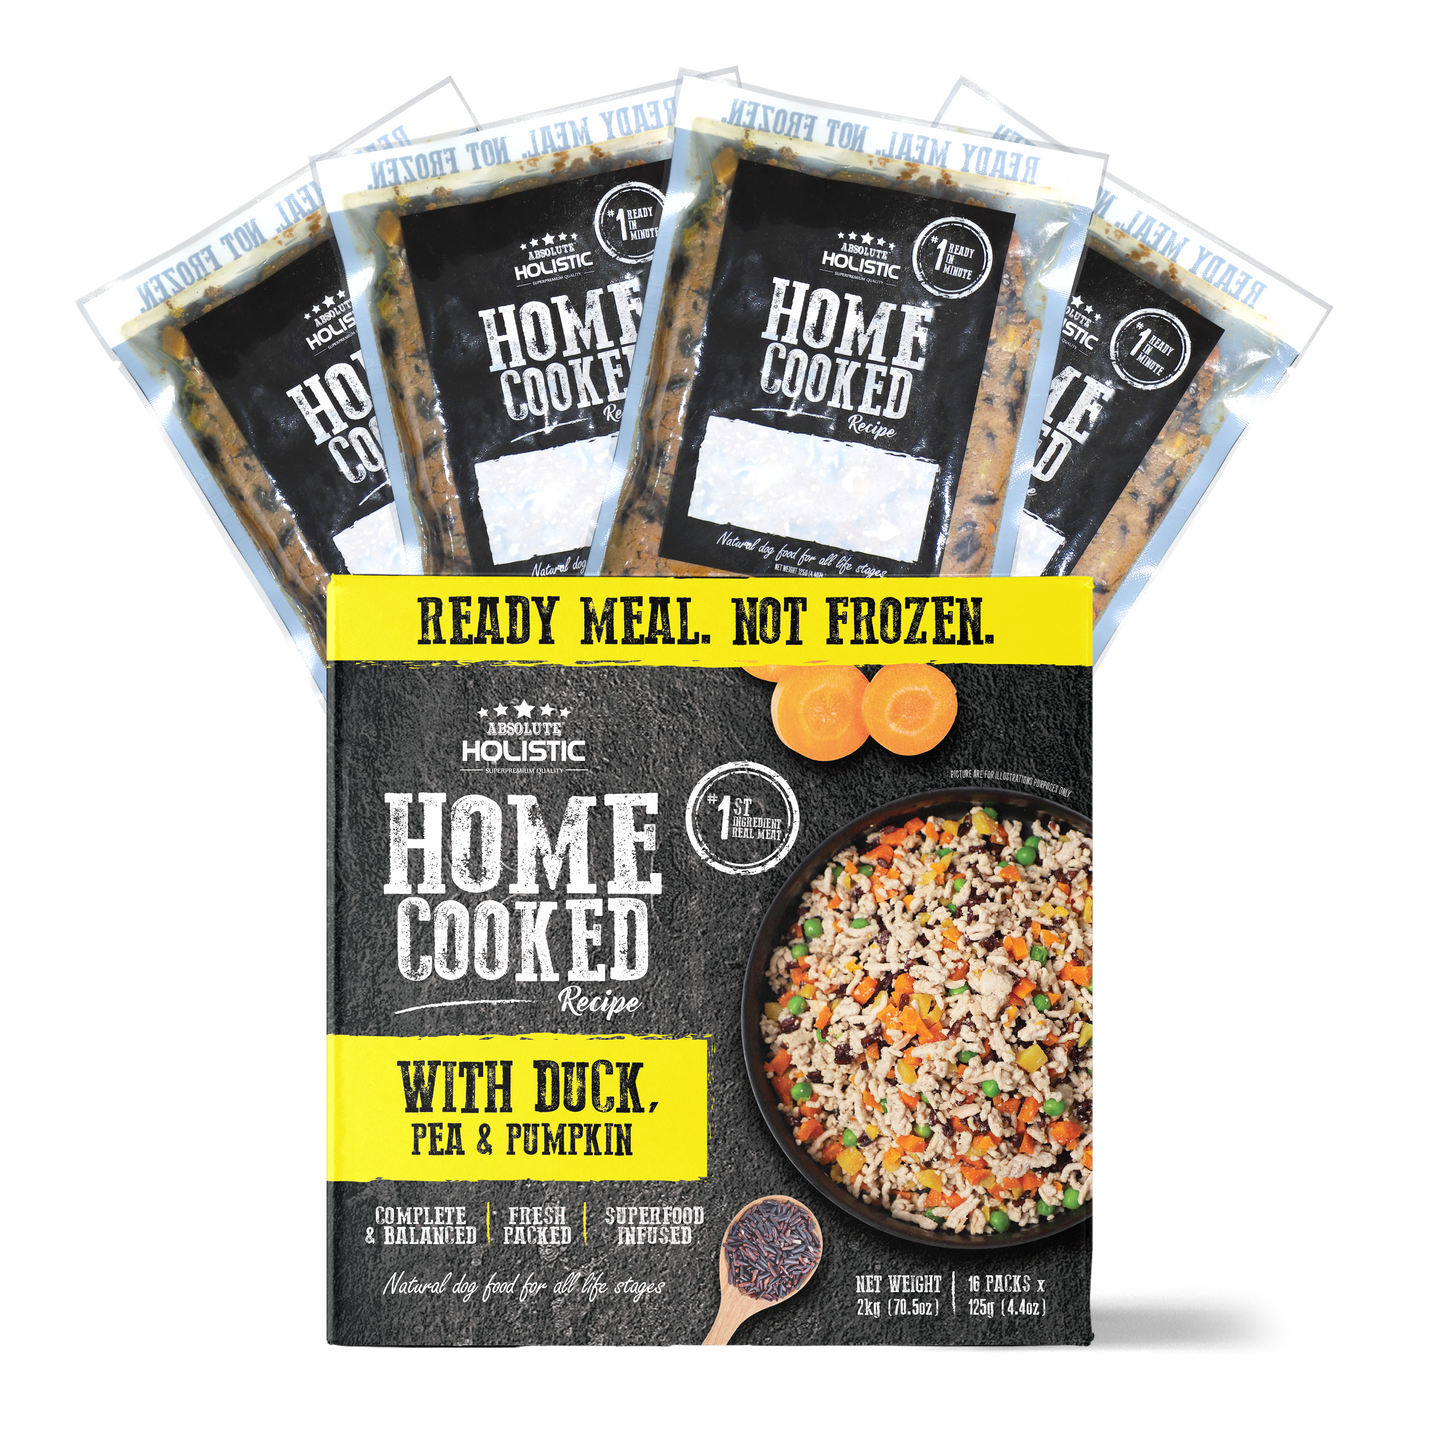 [Bundle Deal] Absolute Holistic Home Cooked Recipe Duck, Peas & Pumpkin Wet Dog Food (2 Sizes)